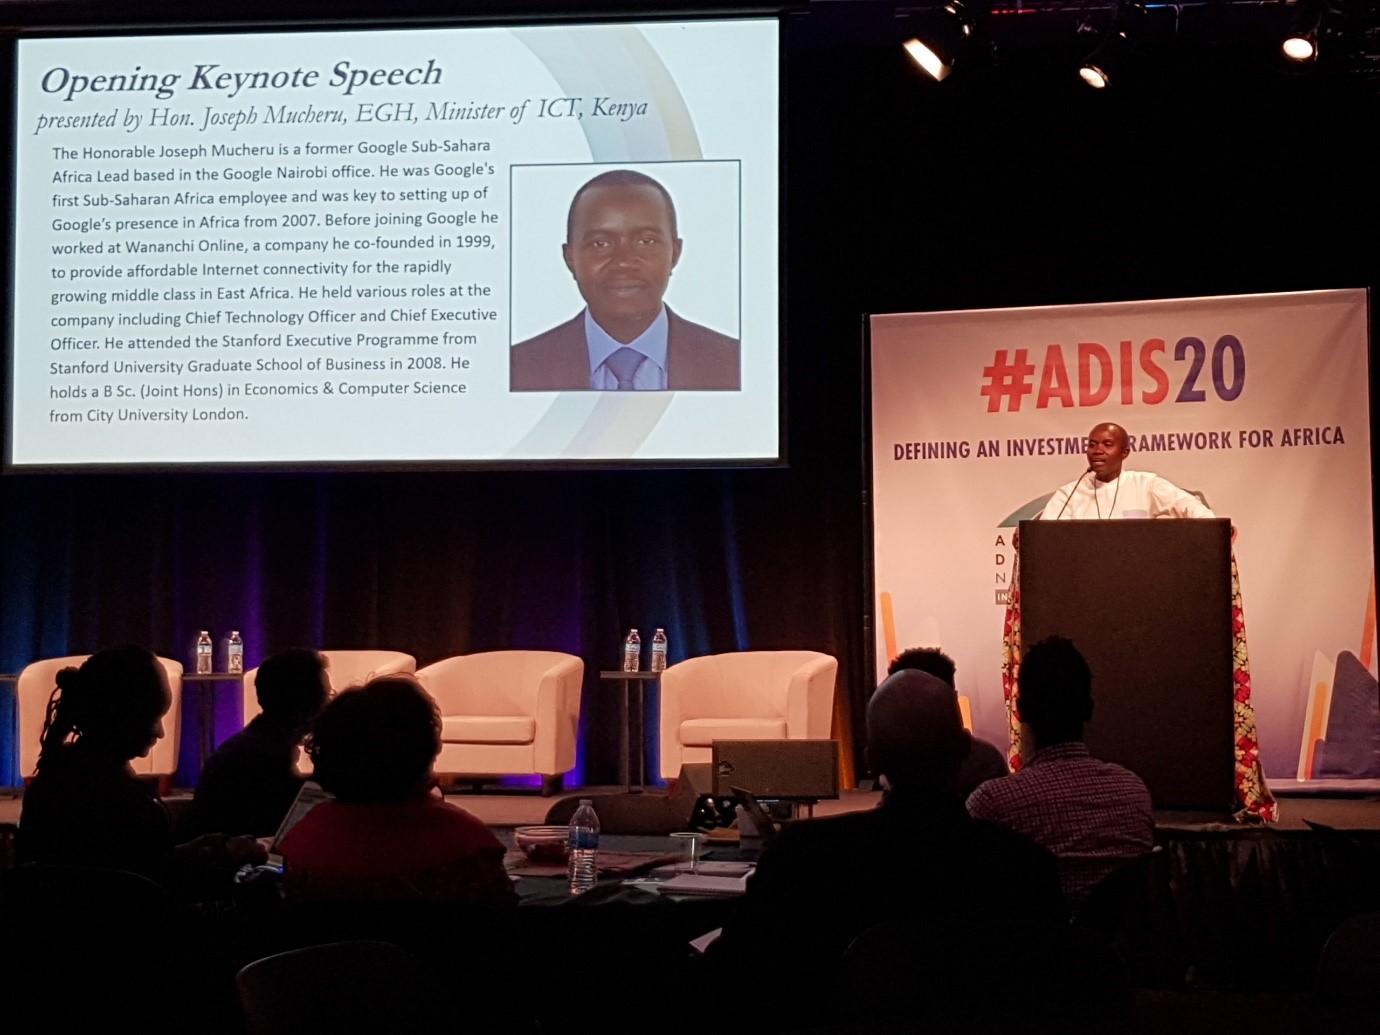 ADIS20 Investors Entrepreneurs Discuss African Investment in The Heart of Silicon Valley